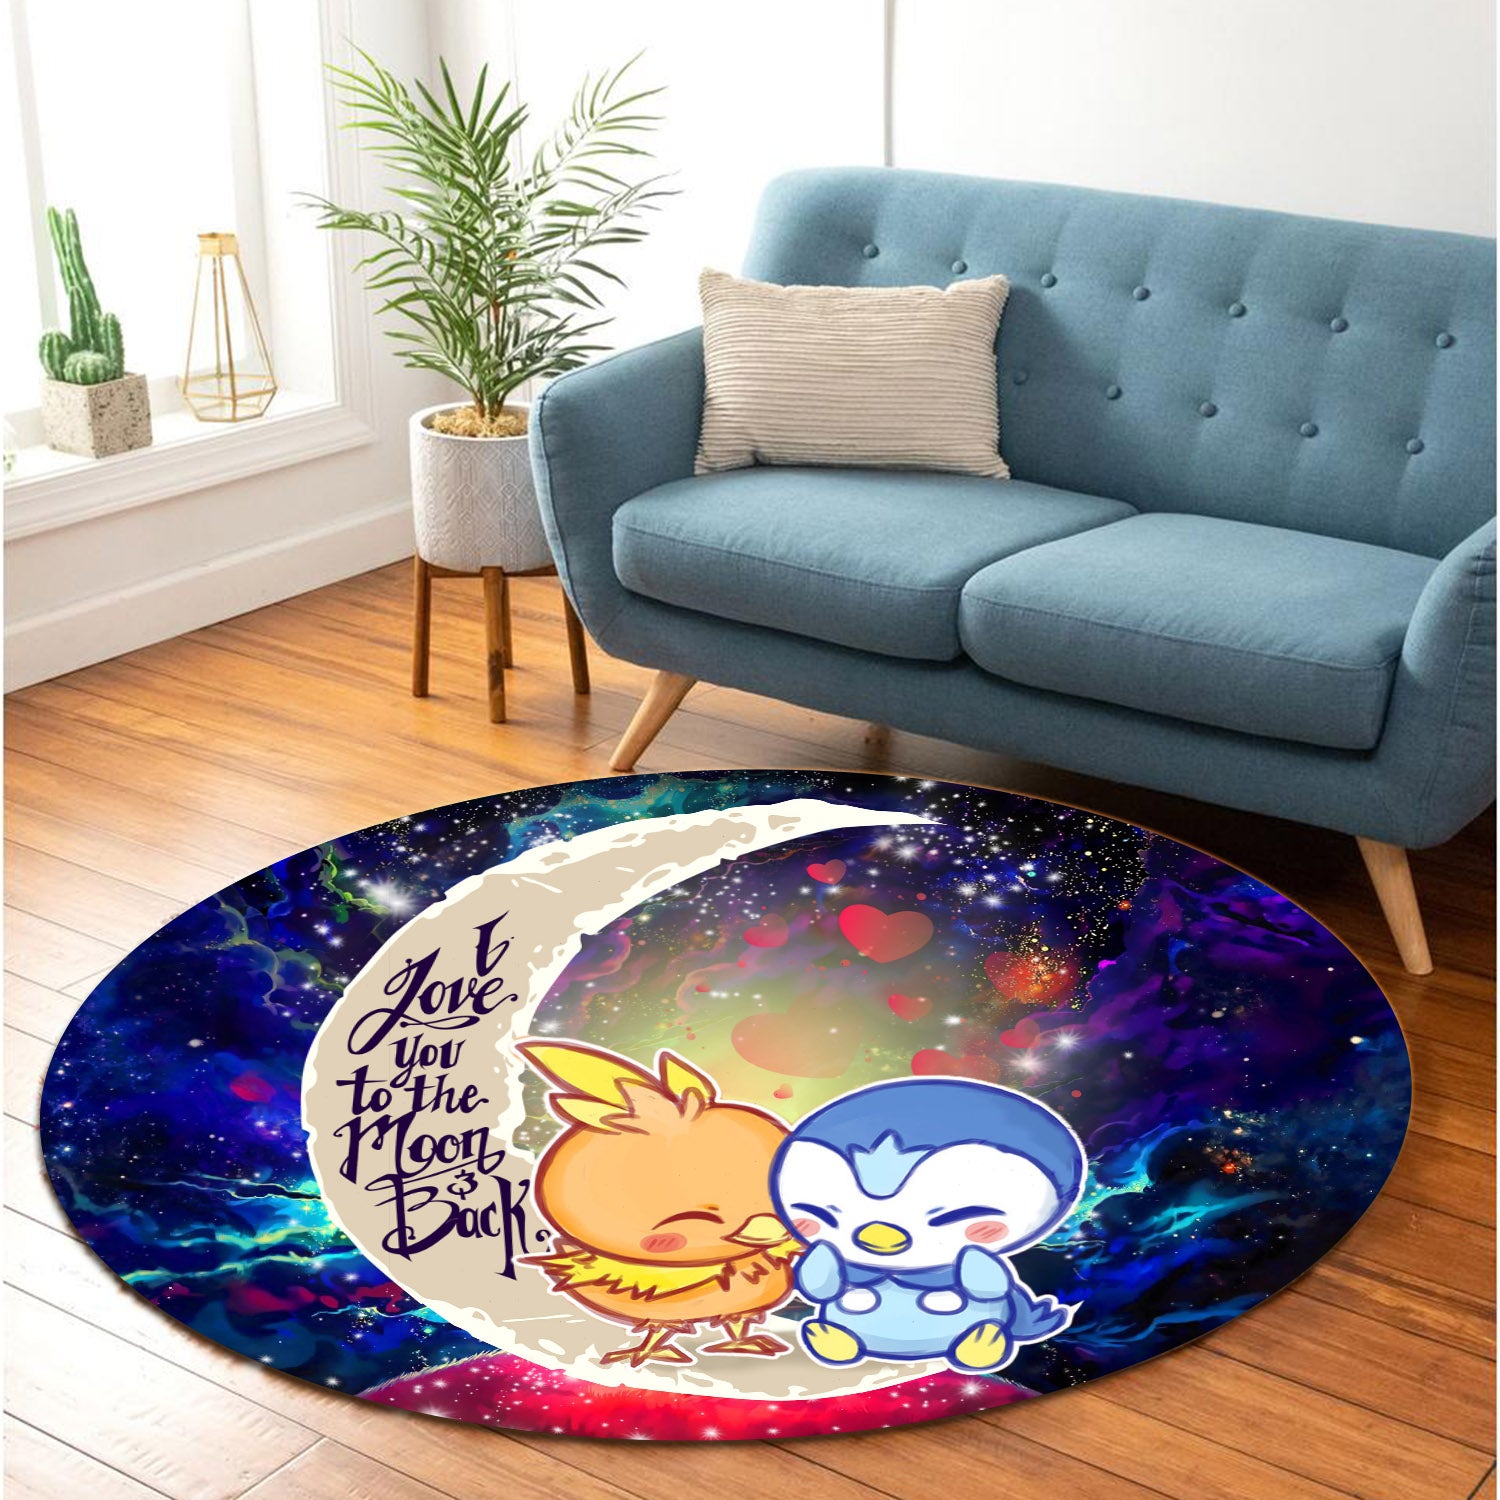 Pokemon Torchic Piplup Love You To The Moon Galaxy Round Carpet Rug Bedroom Livingroom Home Decor Nearkii